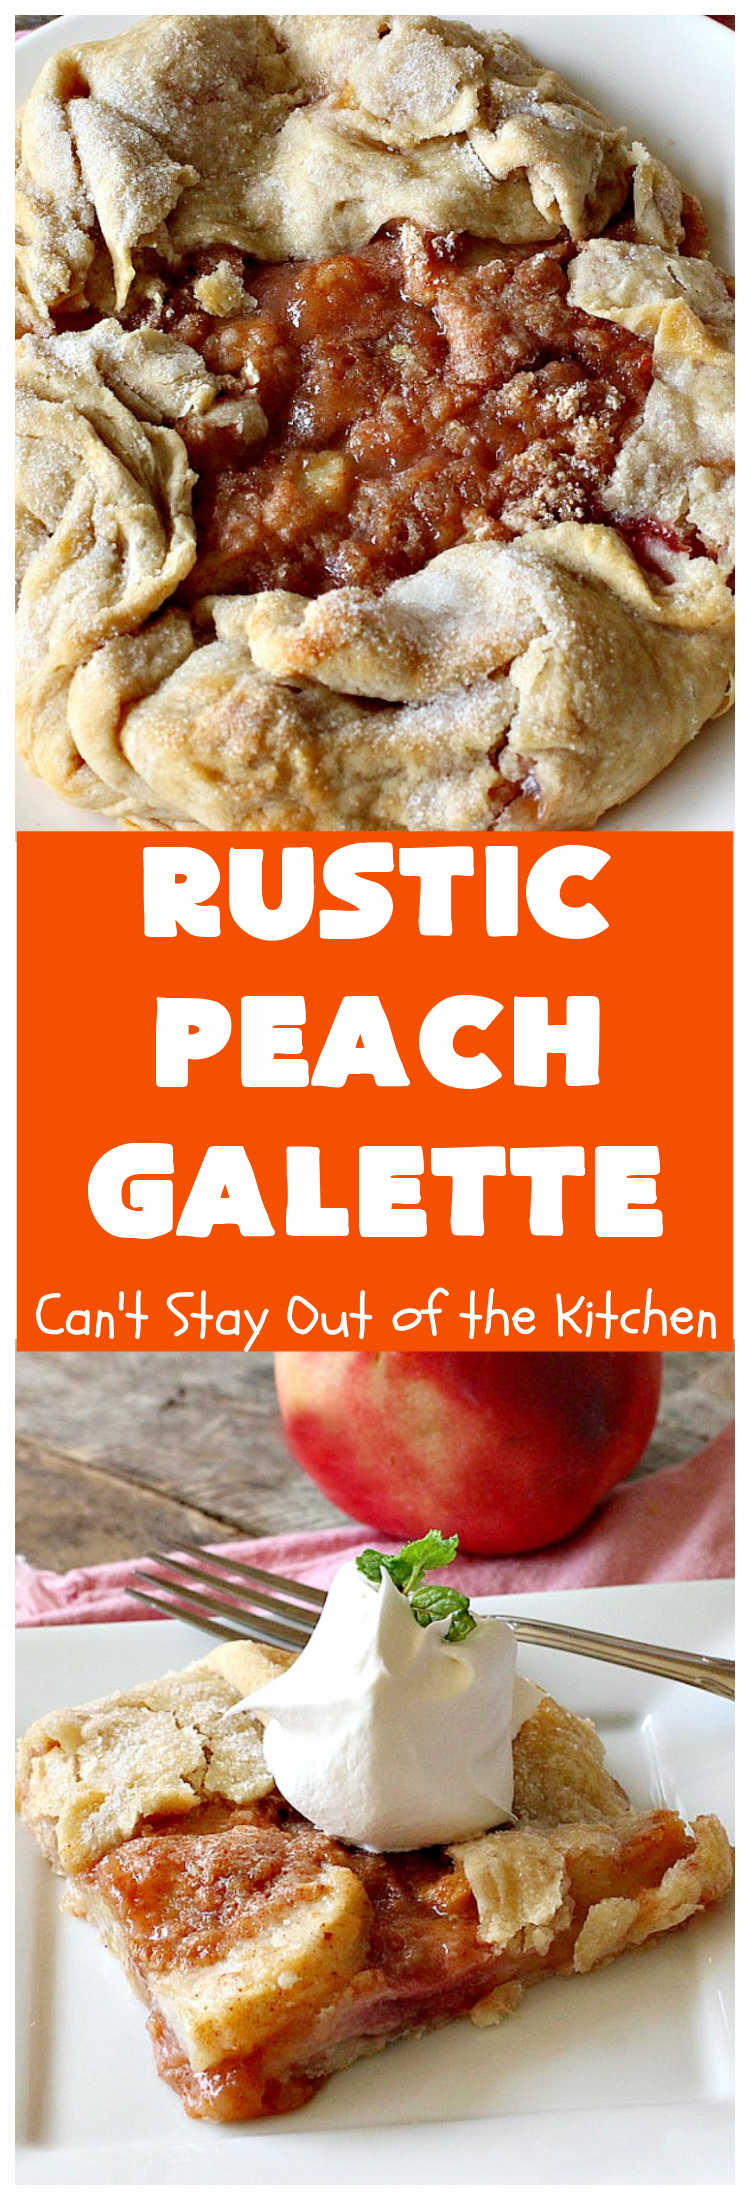 Rustic Peach Galette | Can't Stay Out of the Kitchen | this rustic version of #PeachPie is sensational. Every bite will have you drooling! #peaches #WhiteFleshPeaches #PeachDessert #dessert #CANbassador #WashingtonStateFruitCommission #WashingtonStateStoneFruitGrowers #RusticPeachGalette